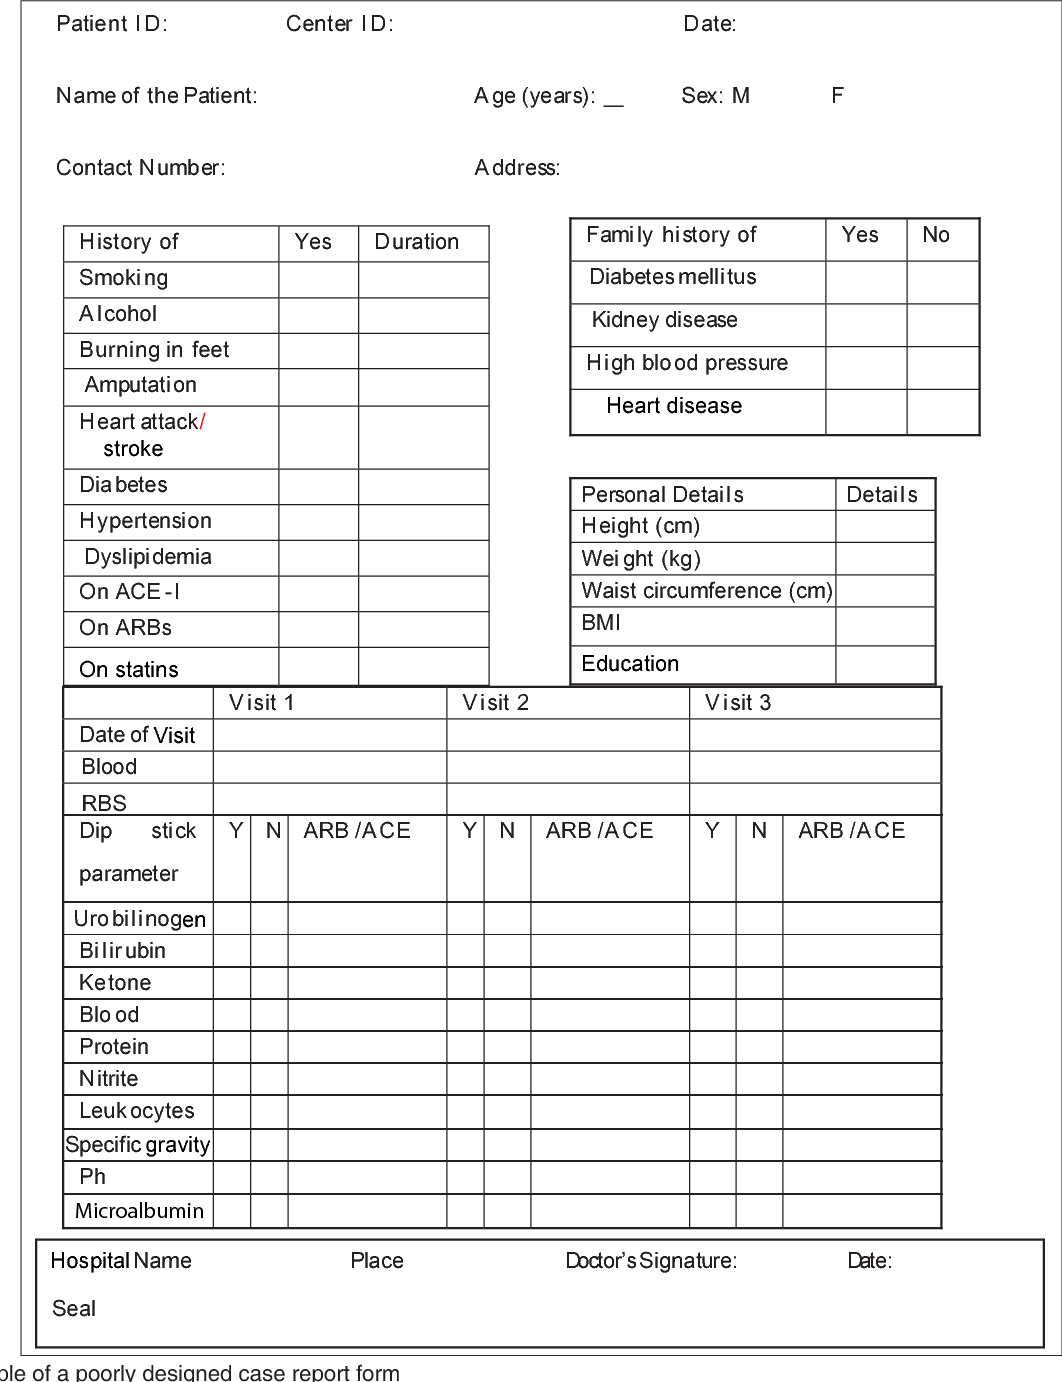 Basics Of Case Report Form Designing In Clinical Research Regarding Case Report Form Template